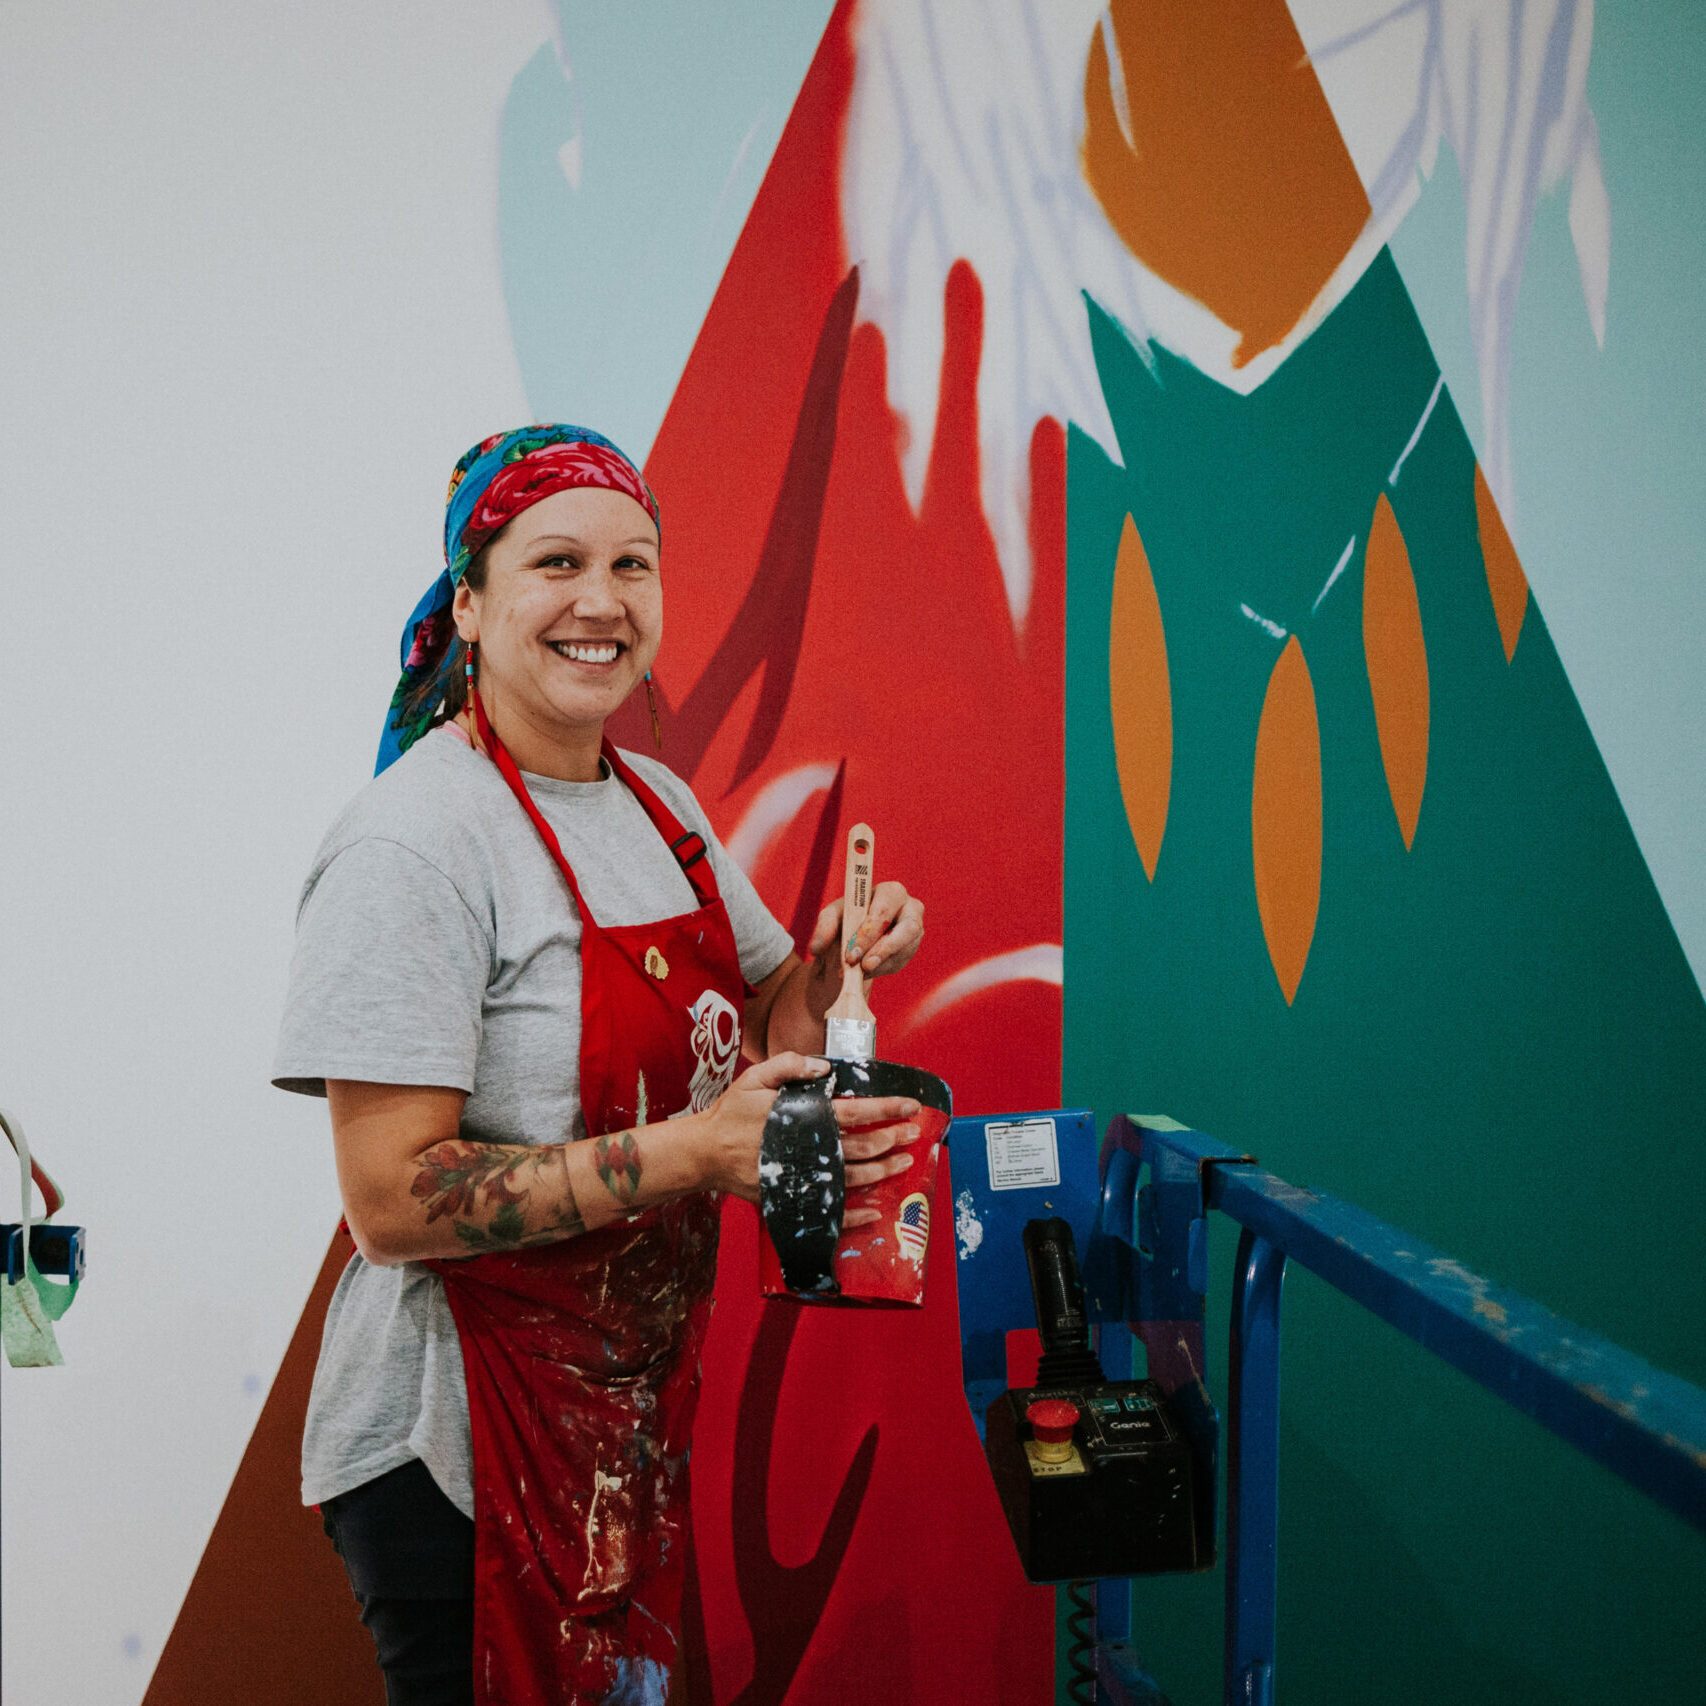 A woman stands in front of an Indigenous art mural that she is currently painting.